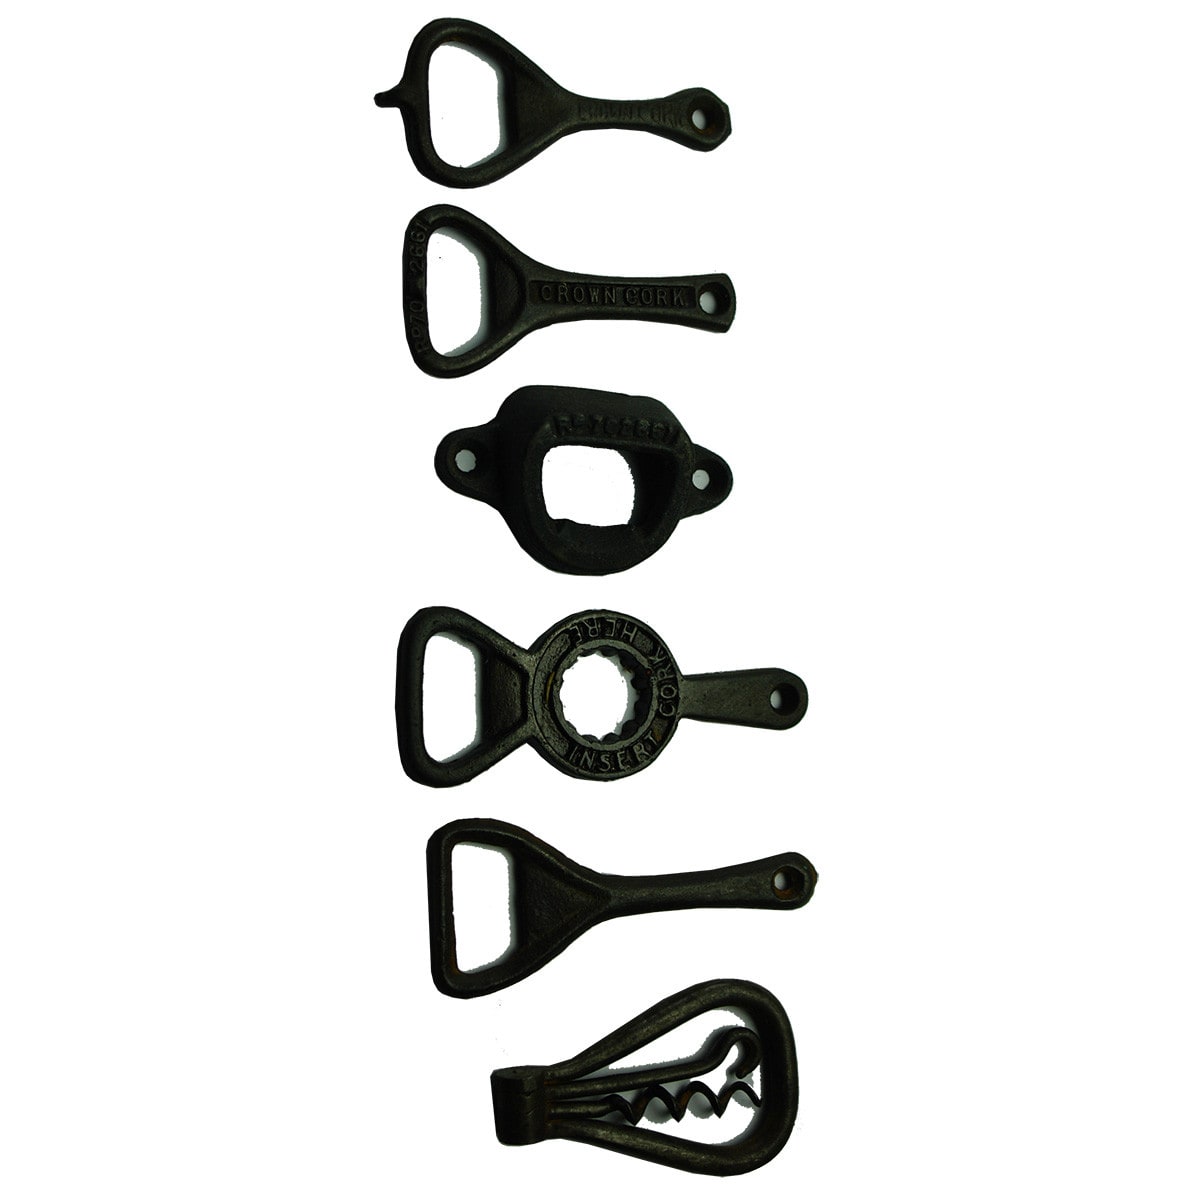 6 Cast Iron Crown Seal Openers & Corkscrew. Counter mounted one and five other types.